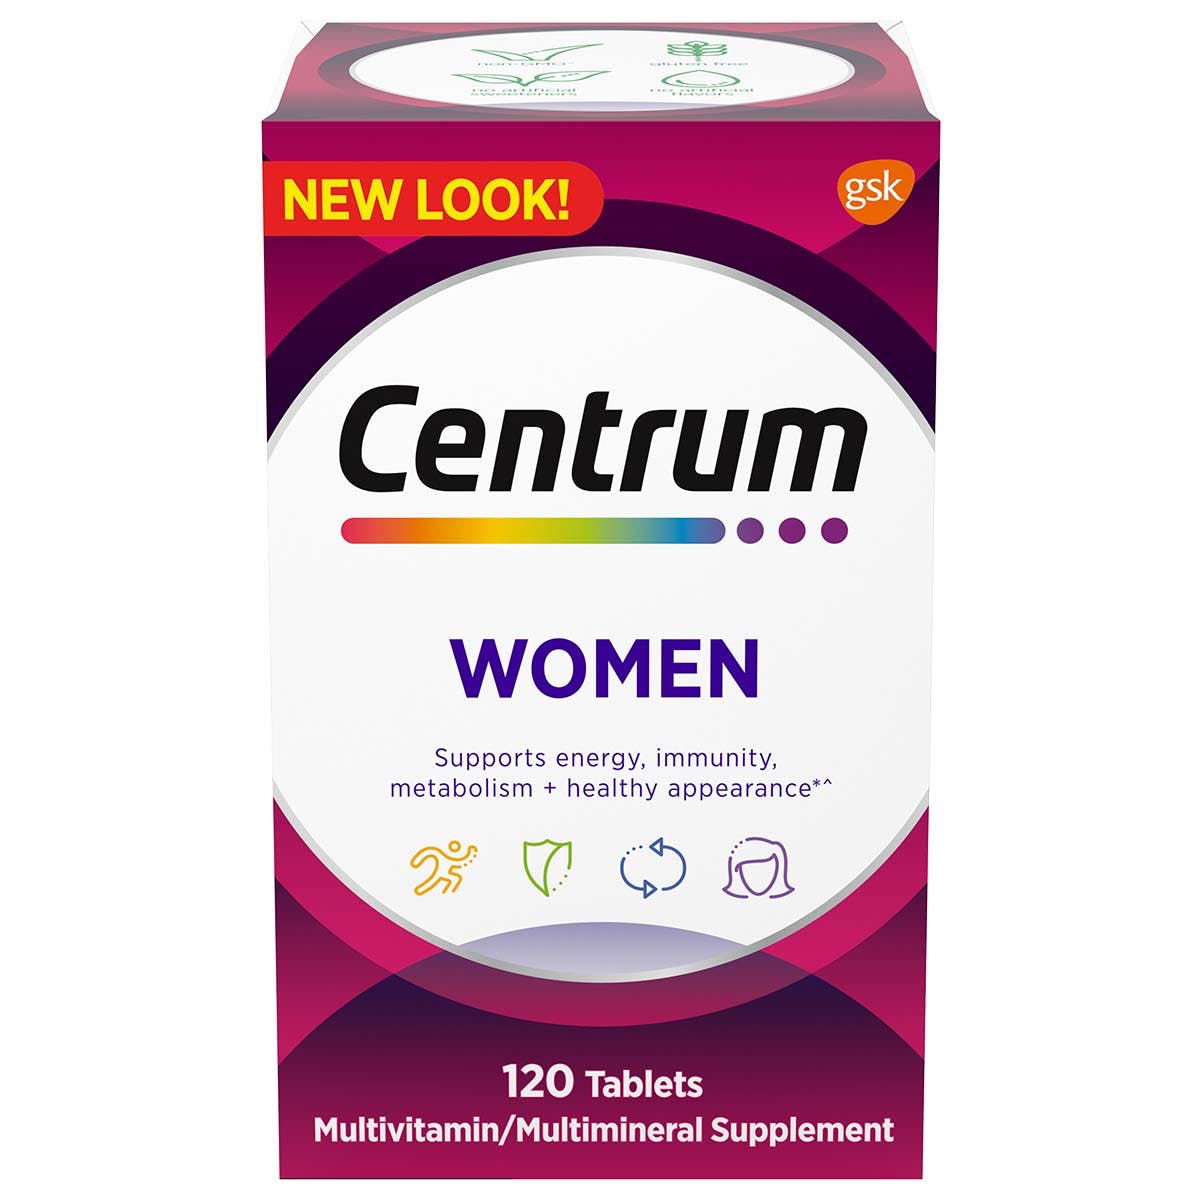 Vitamins For Women In Their 40s